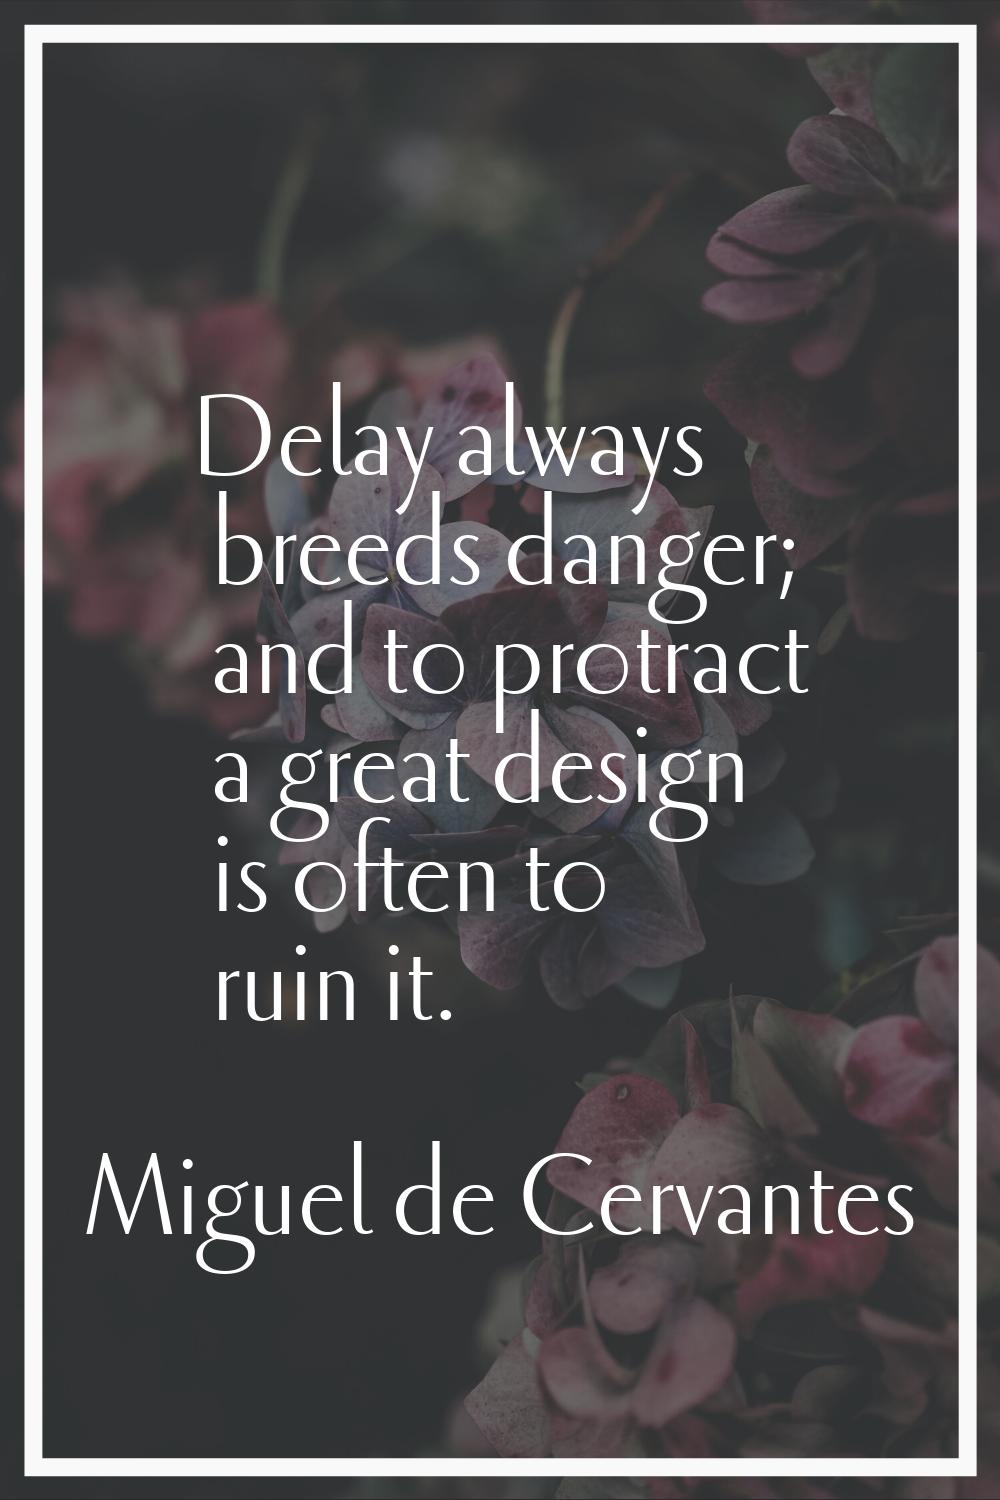 Delay always breeds danger; and to protract a great design is often to ruin it.